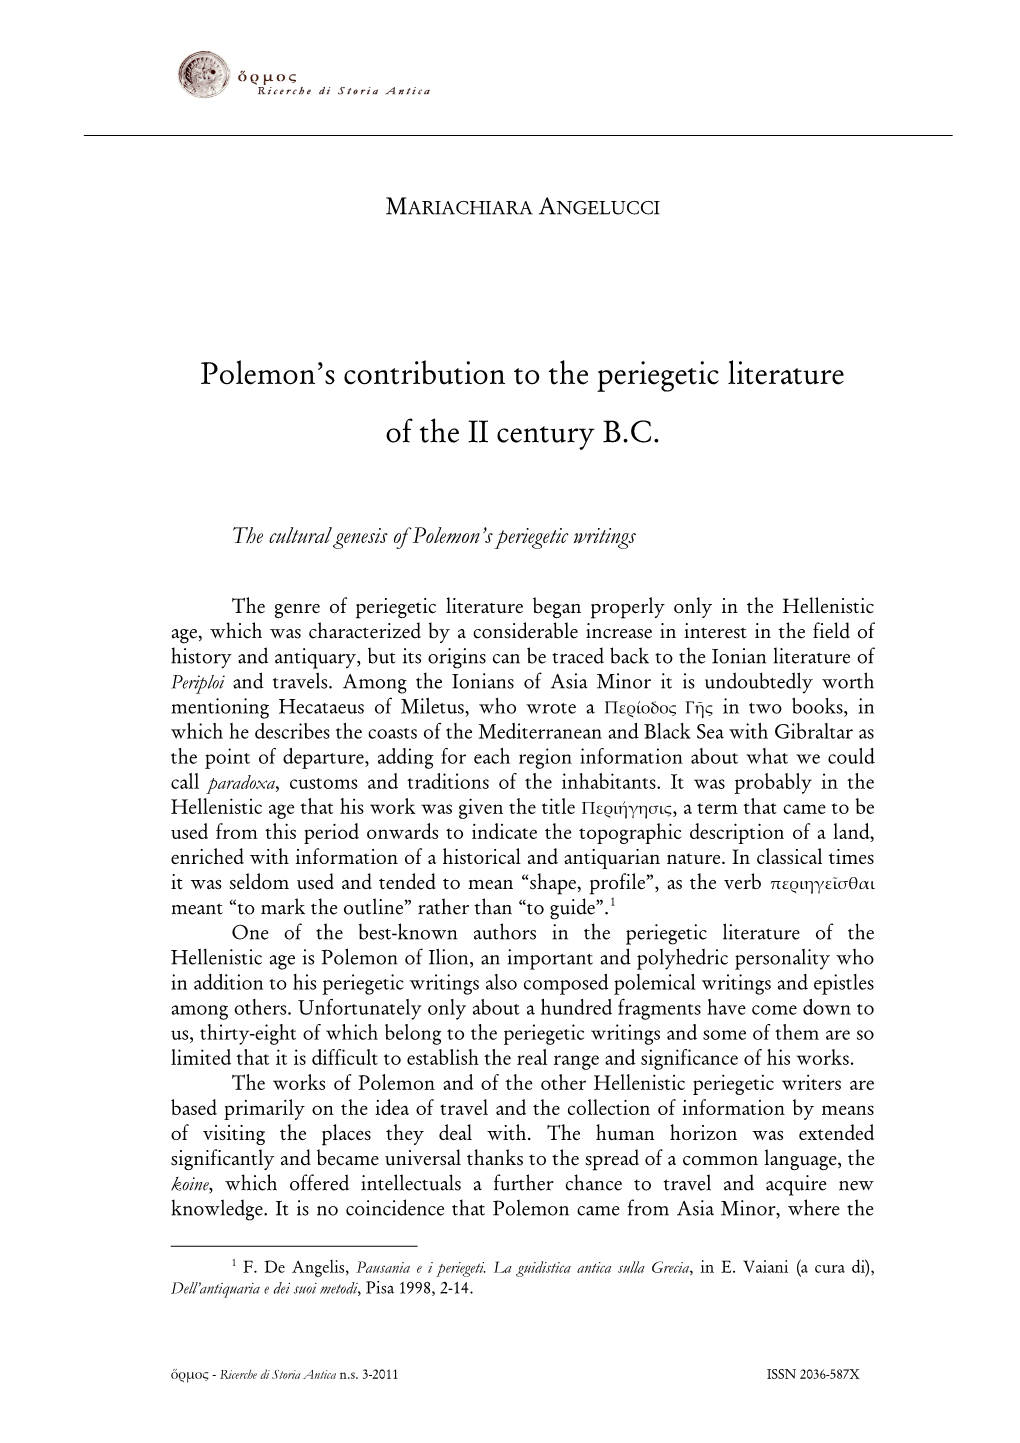 Polemon's Contribution to the Periegetic Literature of the II Century